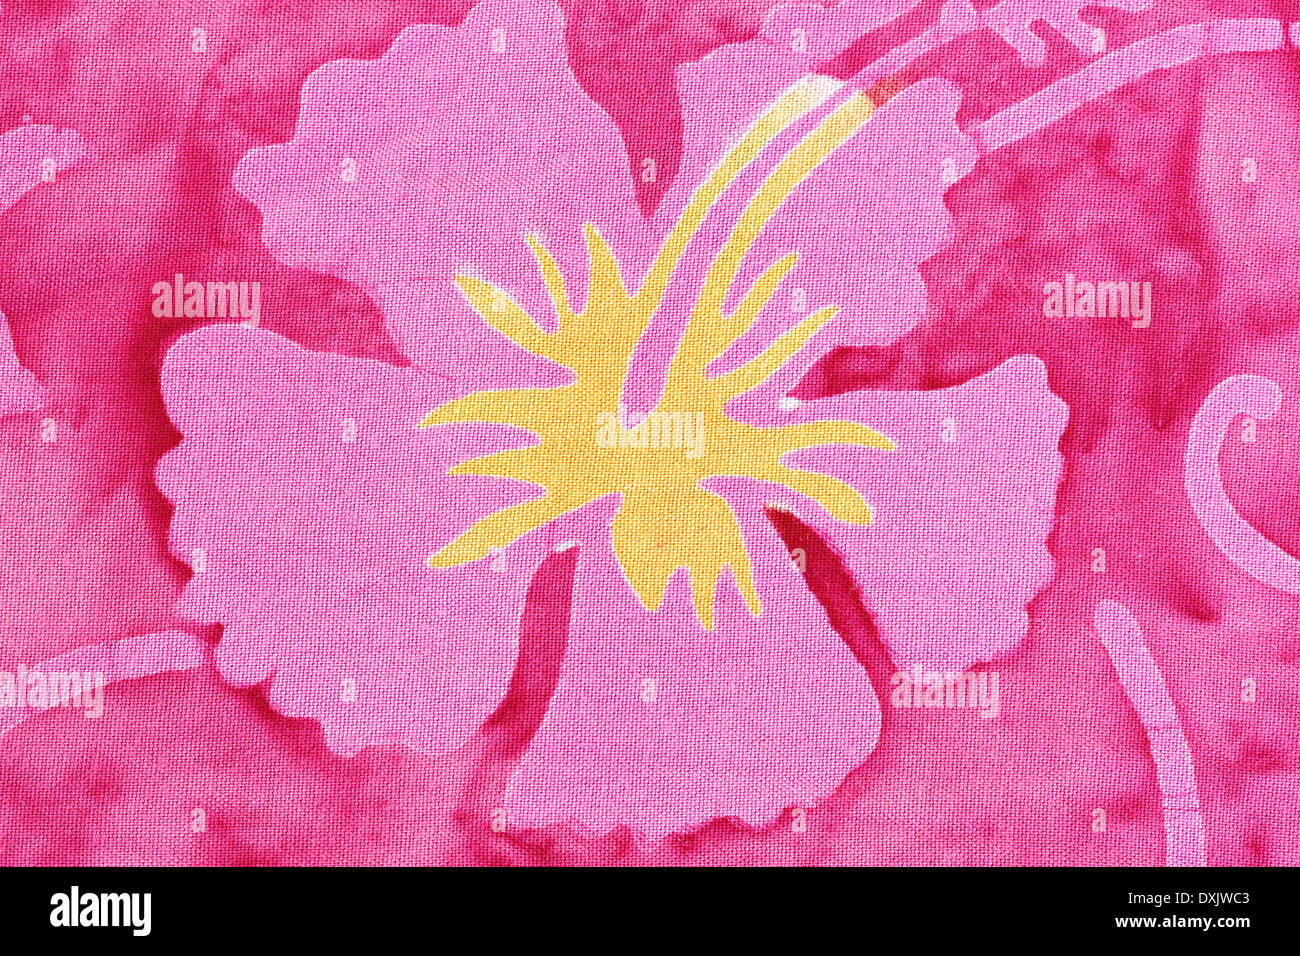 Pink flower pattern on the fabric for the background. Stock Photo